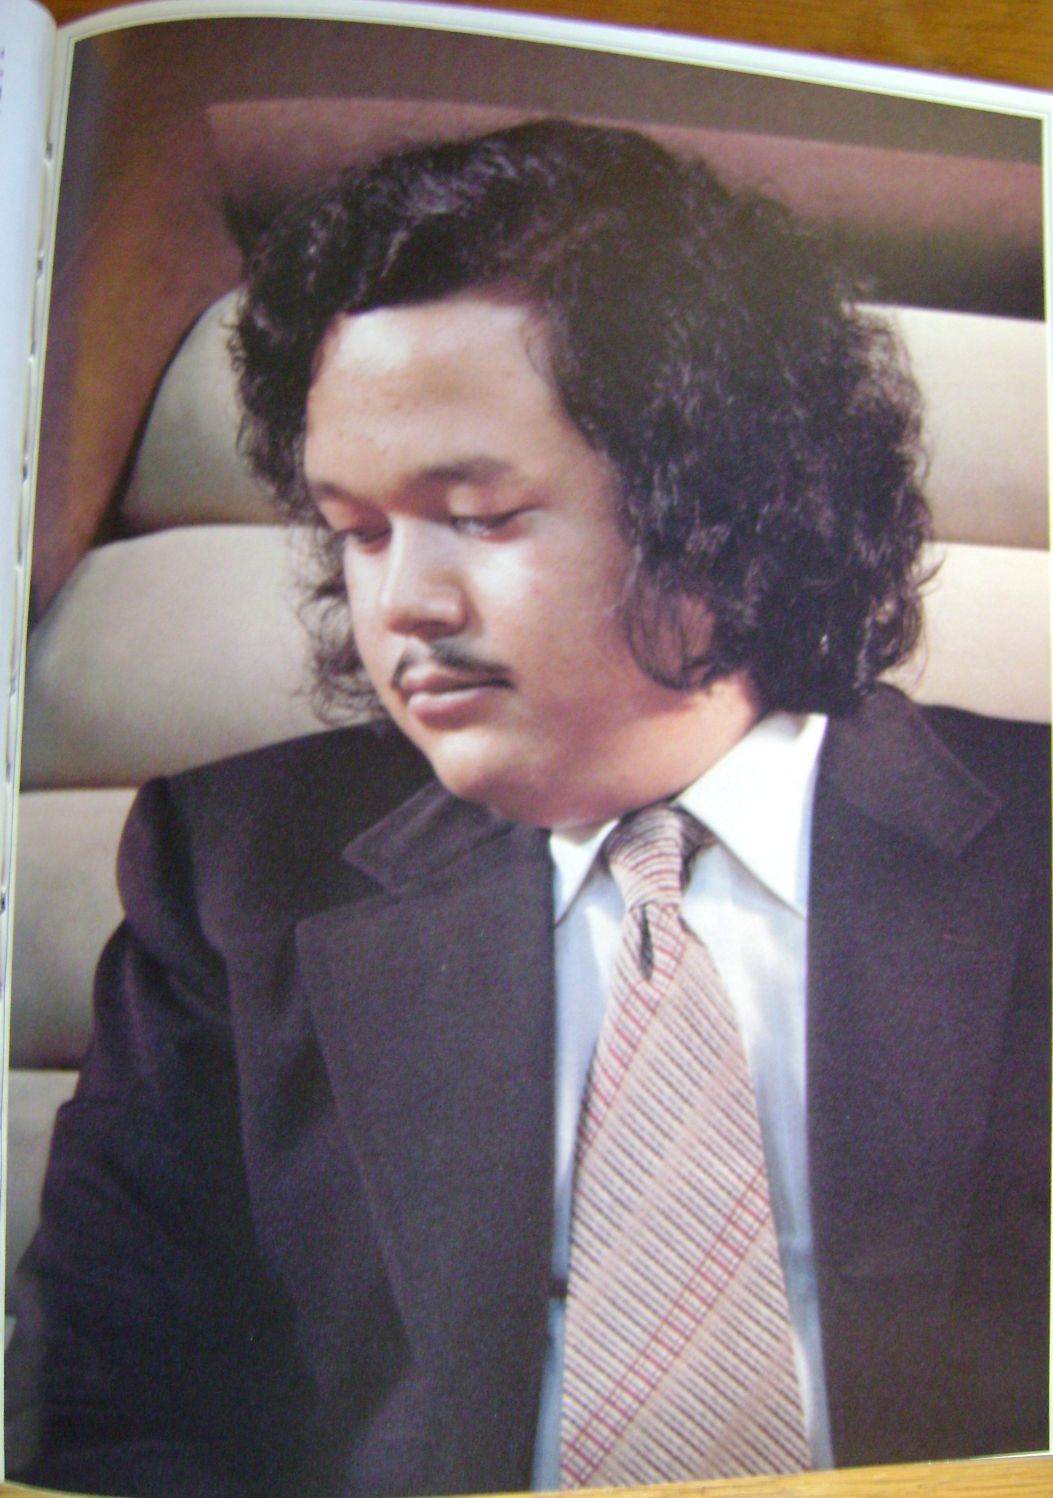 Prem Rawat aka Maharaji, The Perfect Master, Lord Of The Universe And Master Of Flabby Jowls